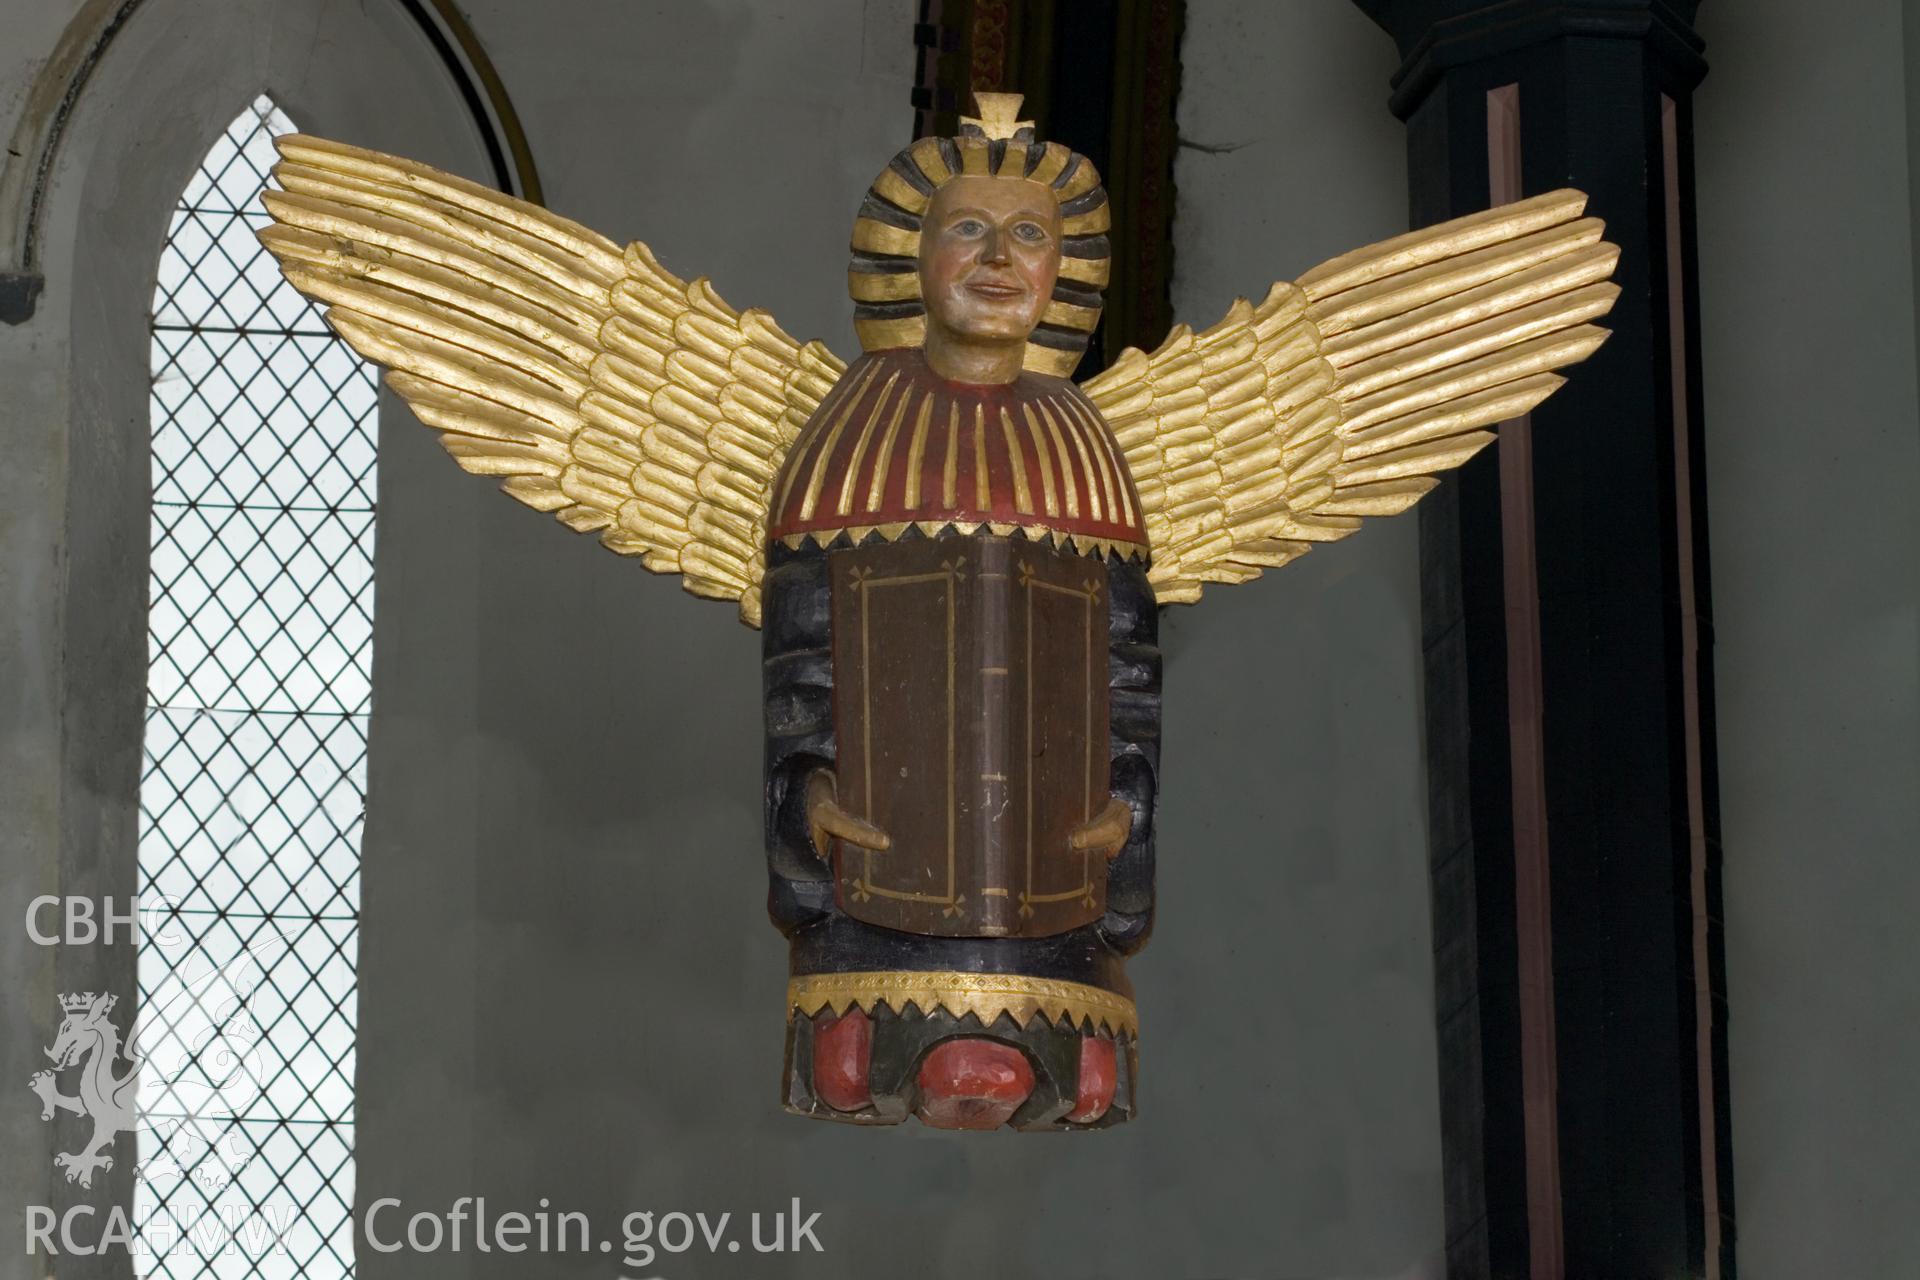 Carved and painted wooden angel effigy.